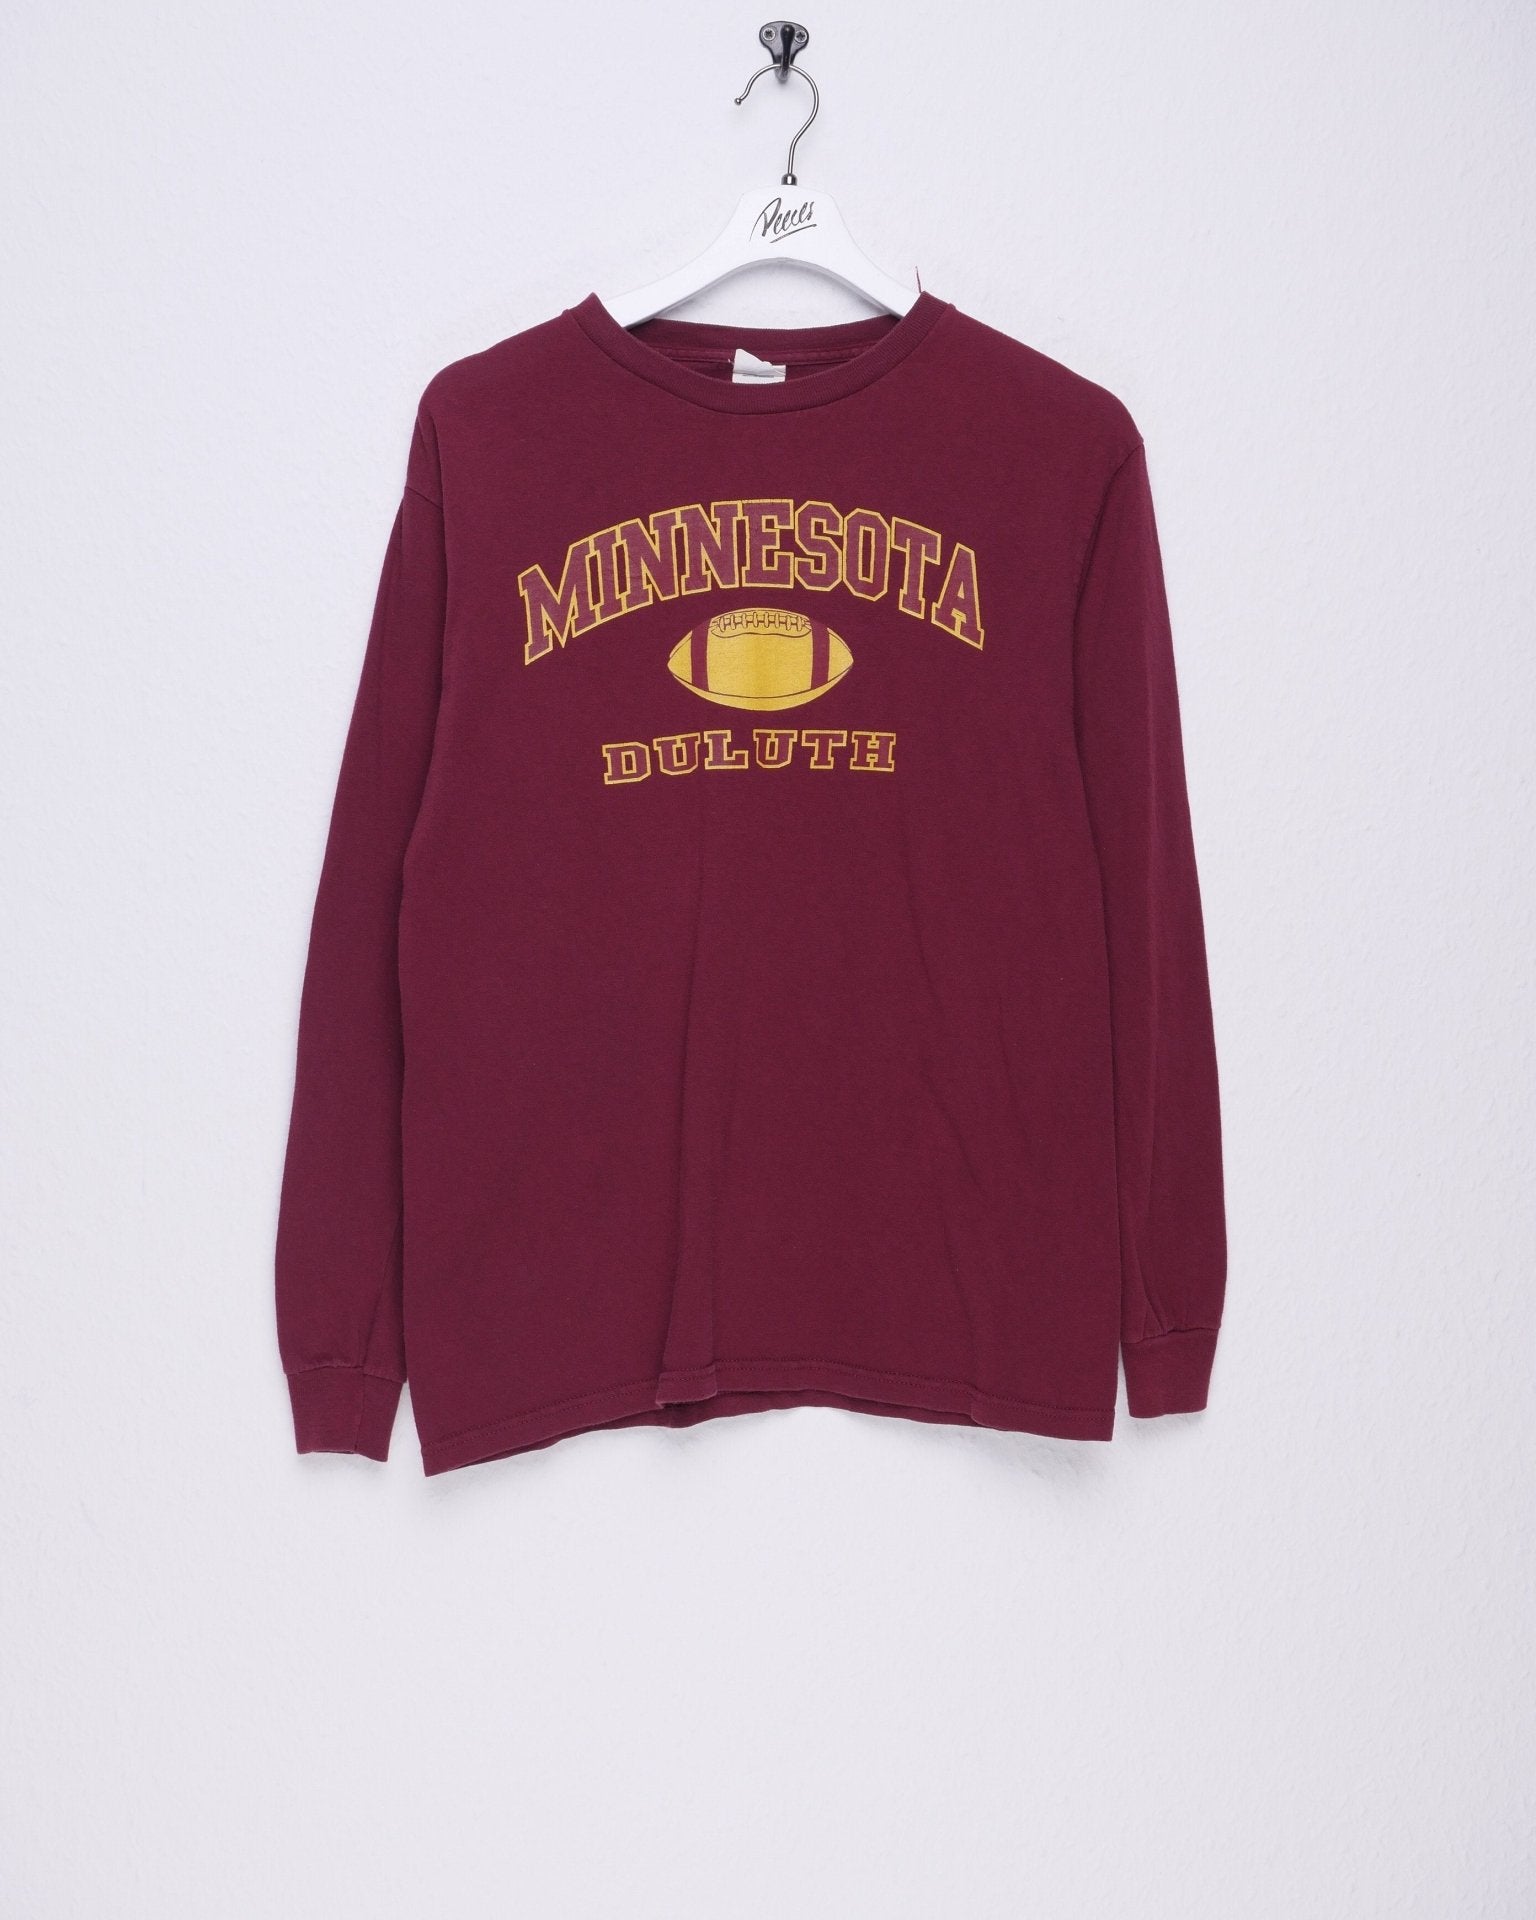 Minnesota Duluth printed Spellout L/S Shirt - Peeces